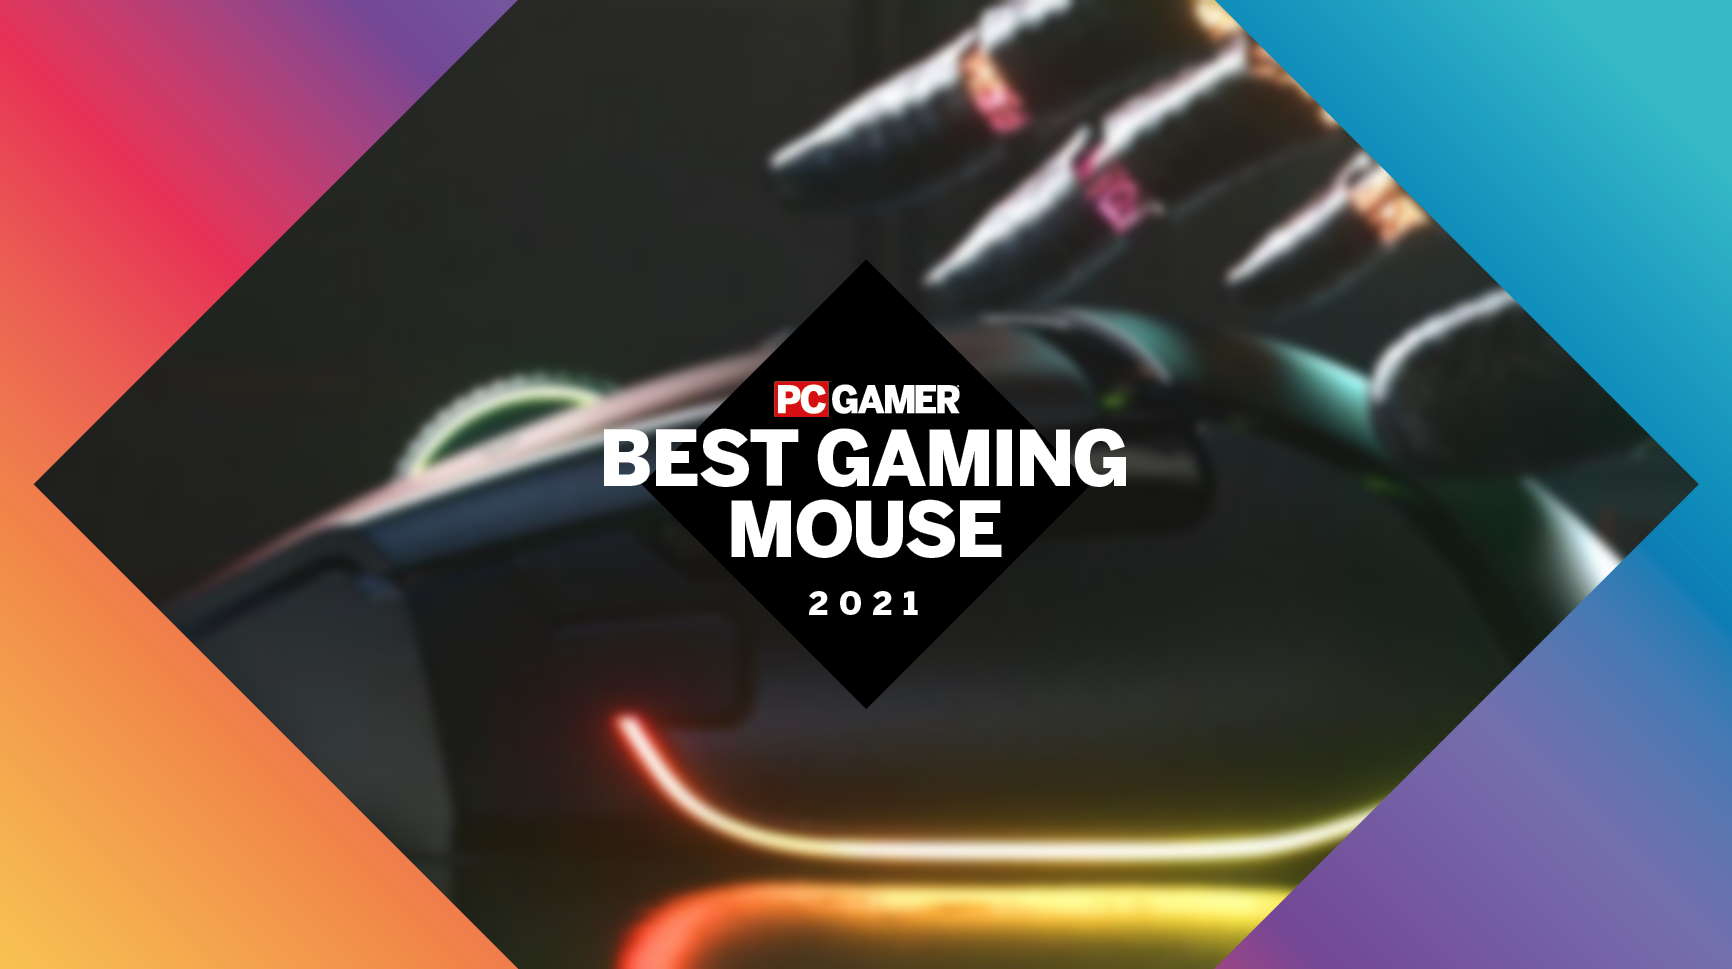 PC Gamer Hardware Awards: What Is The Best Gaming Mouse Of 2021? thumbnail